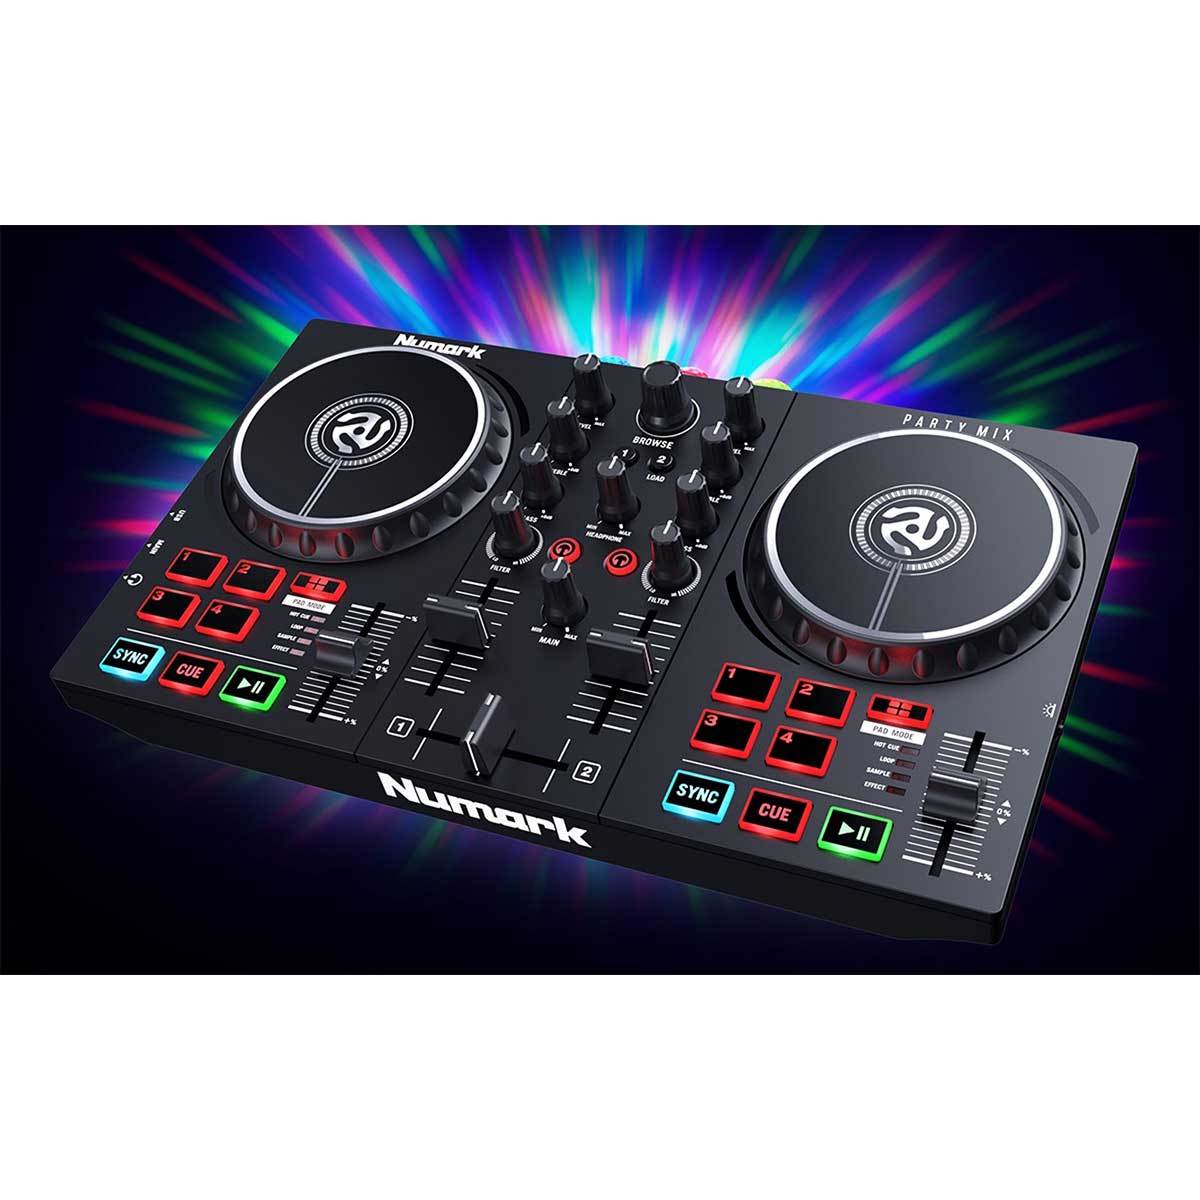 Numark Party Mix MKII DJ Controller with Audio and Lights